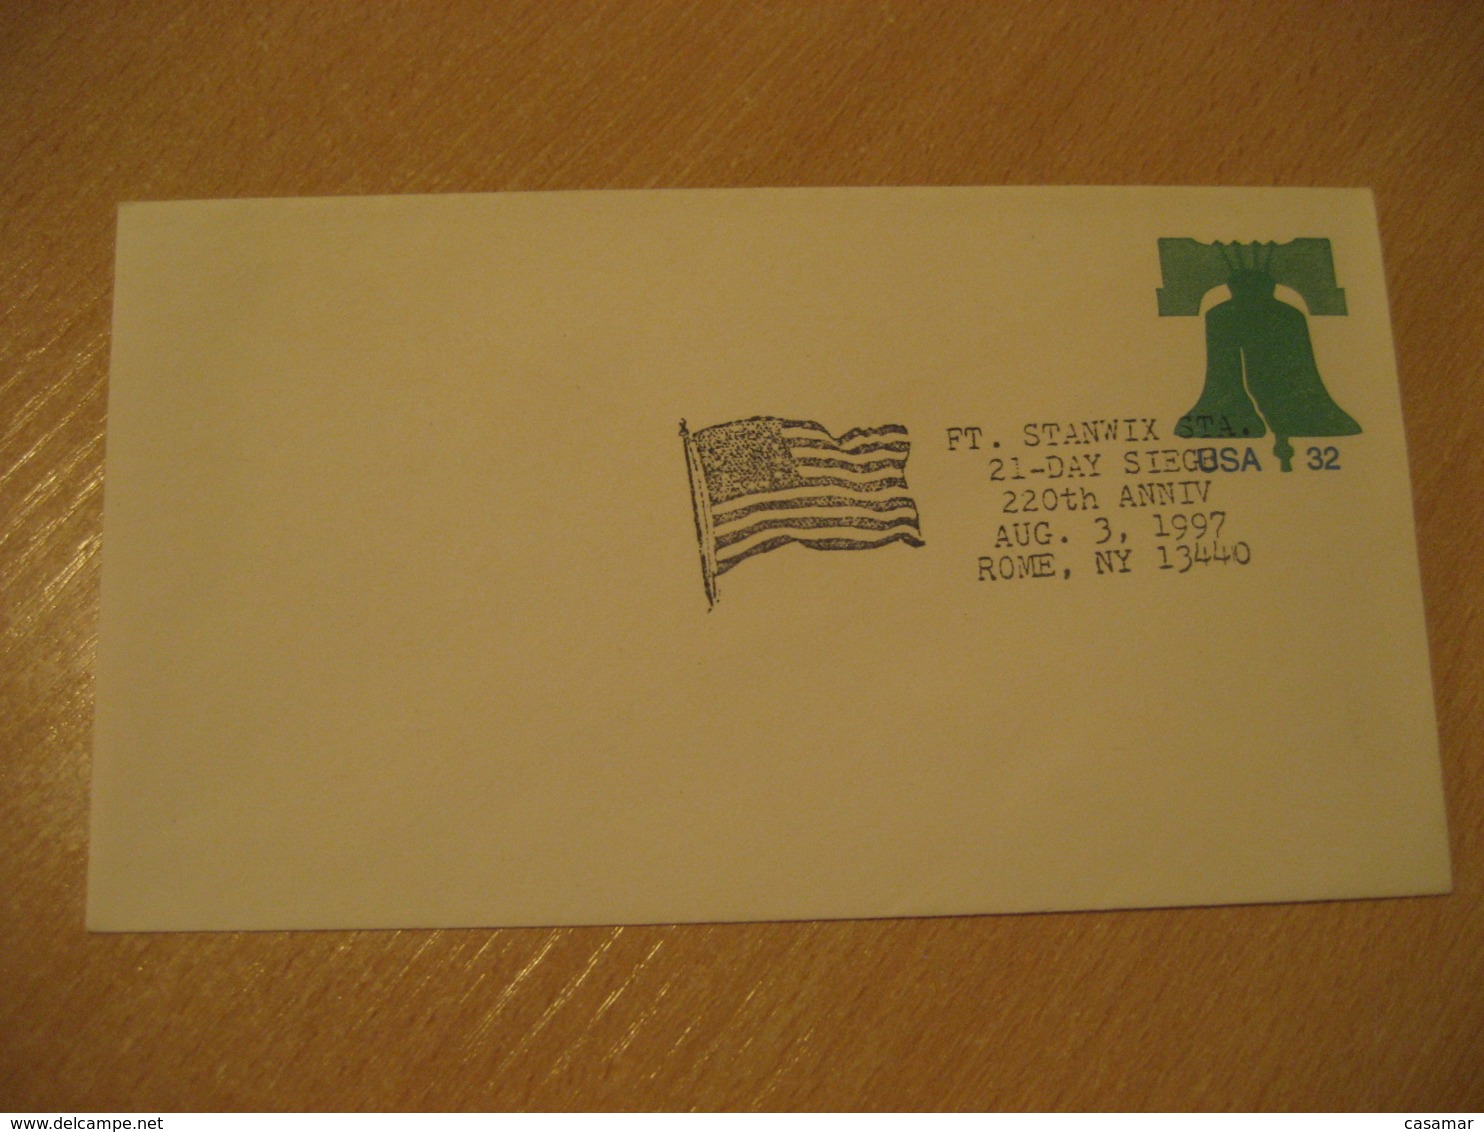 ROME 1997 Ft. Stanwix 21 Day Siege Flag Flags Cancel Cover USA - Buste